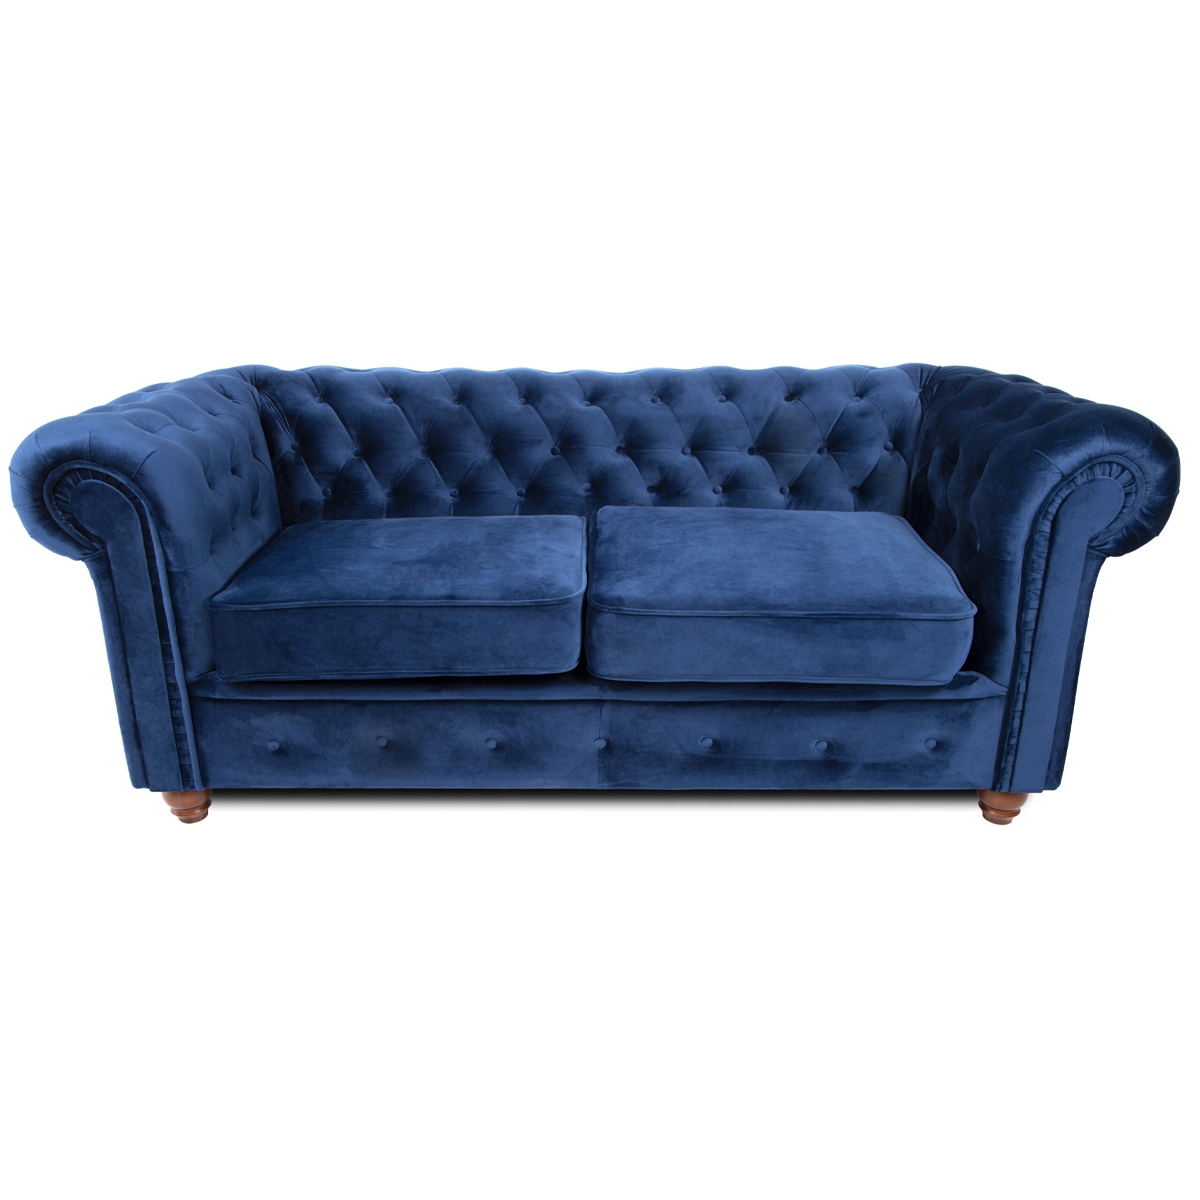 Chesterfield Plush Fabric 2 Seater Sofa – Blue – The Online Sofa Shop